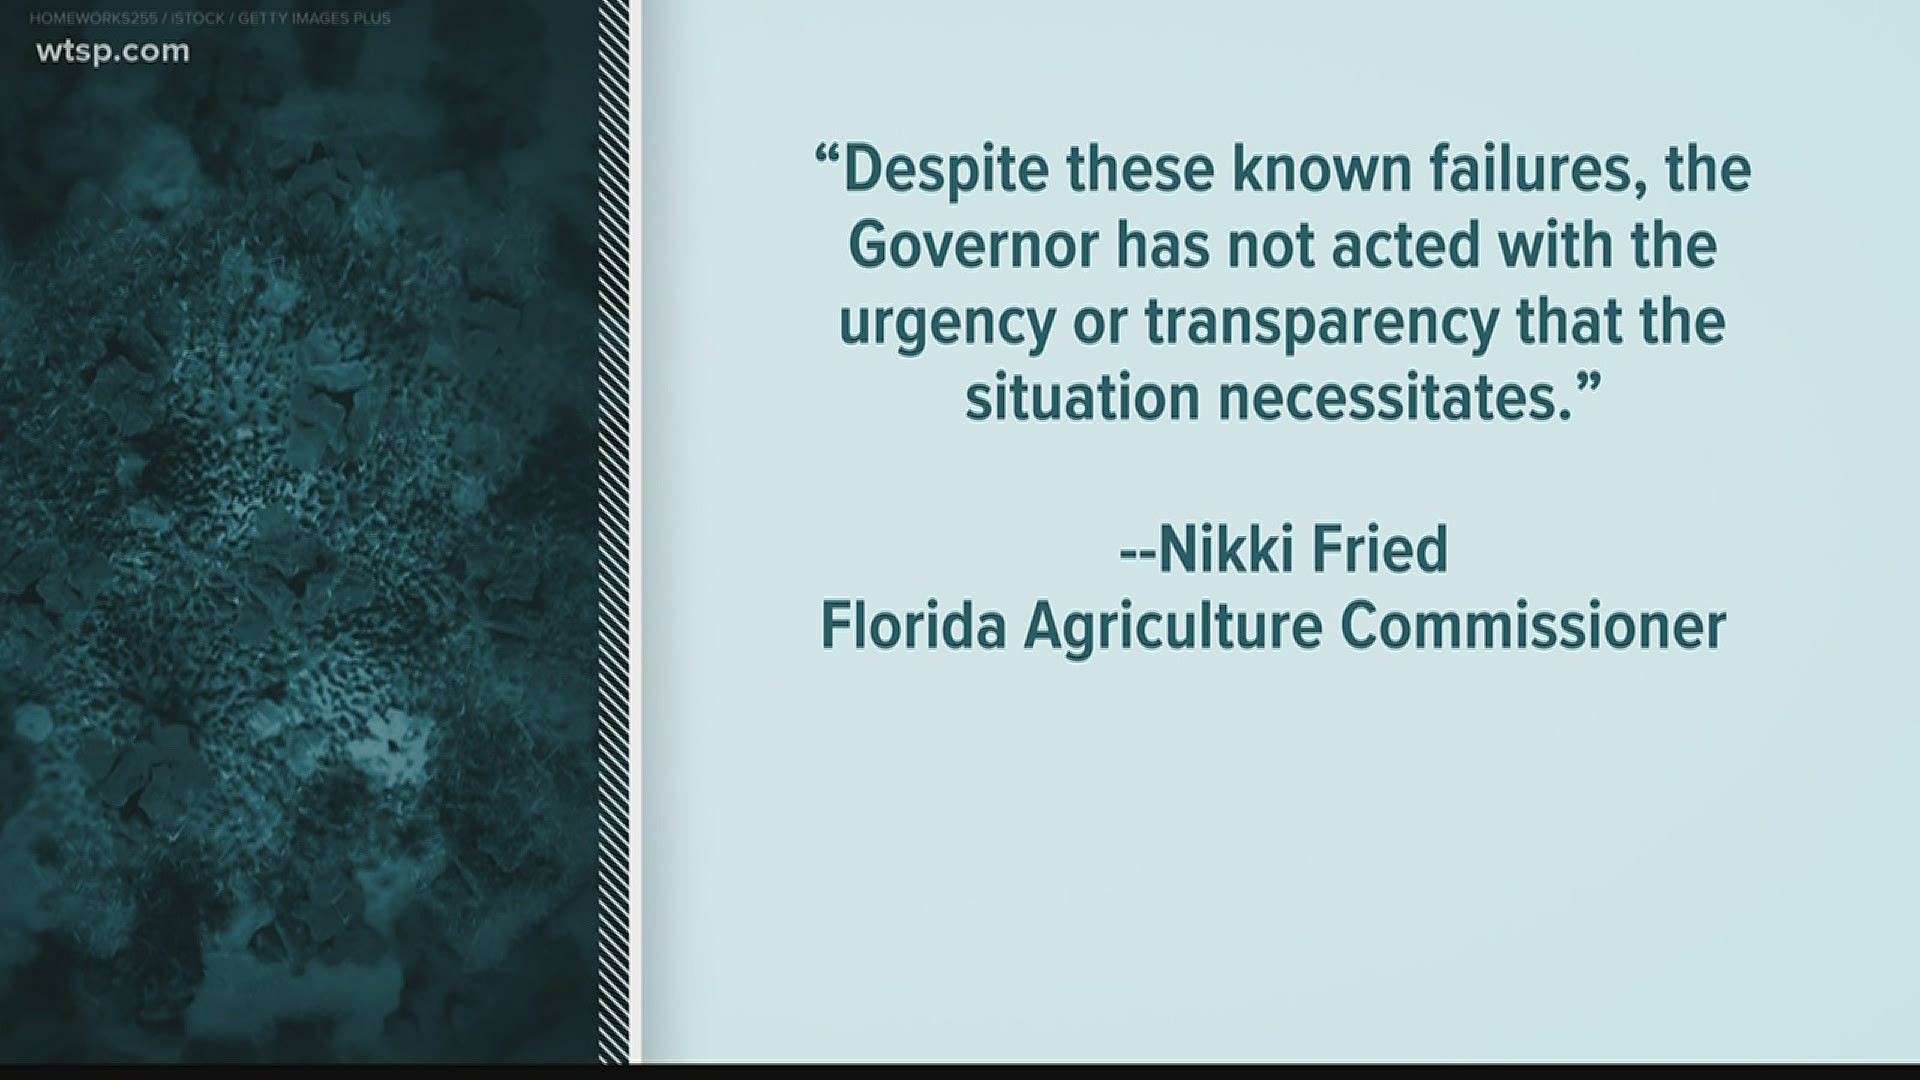 Agriculture Commissioner Nikki Fried joins a long list of other leaders calling for an investigation into the system that has prevented thousands from getting relief